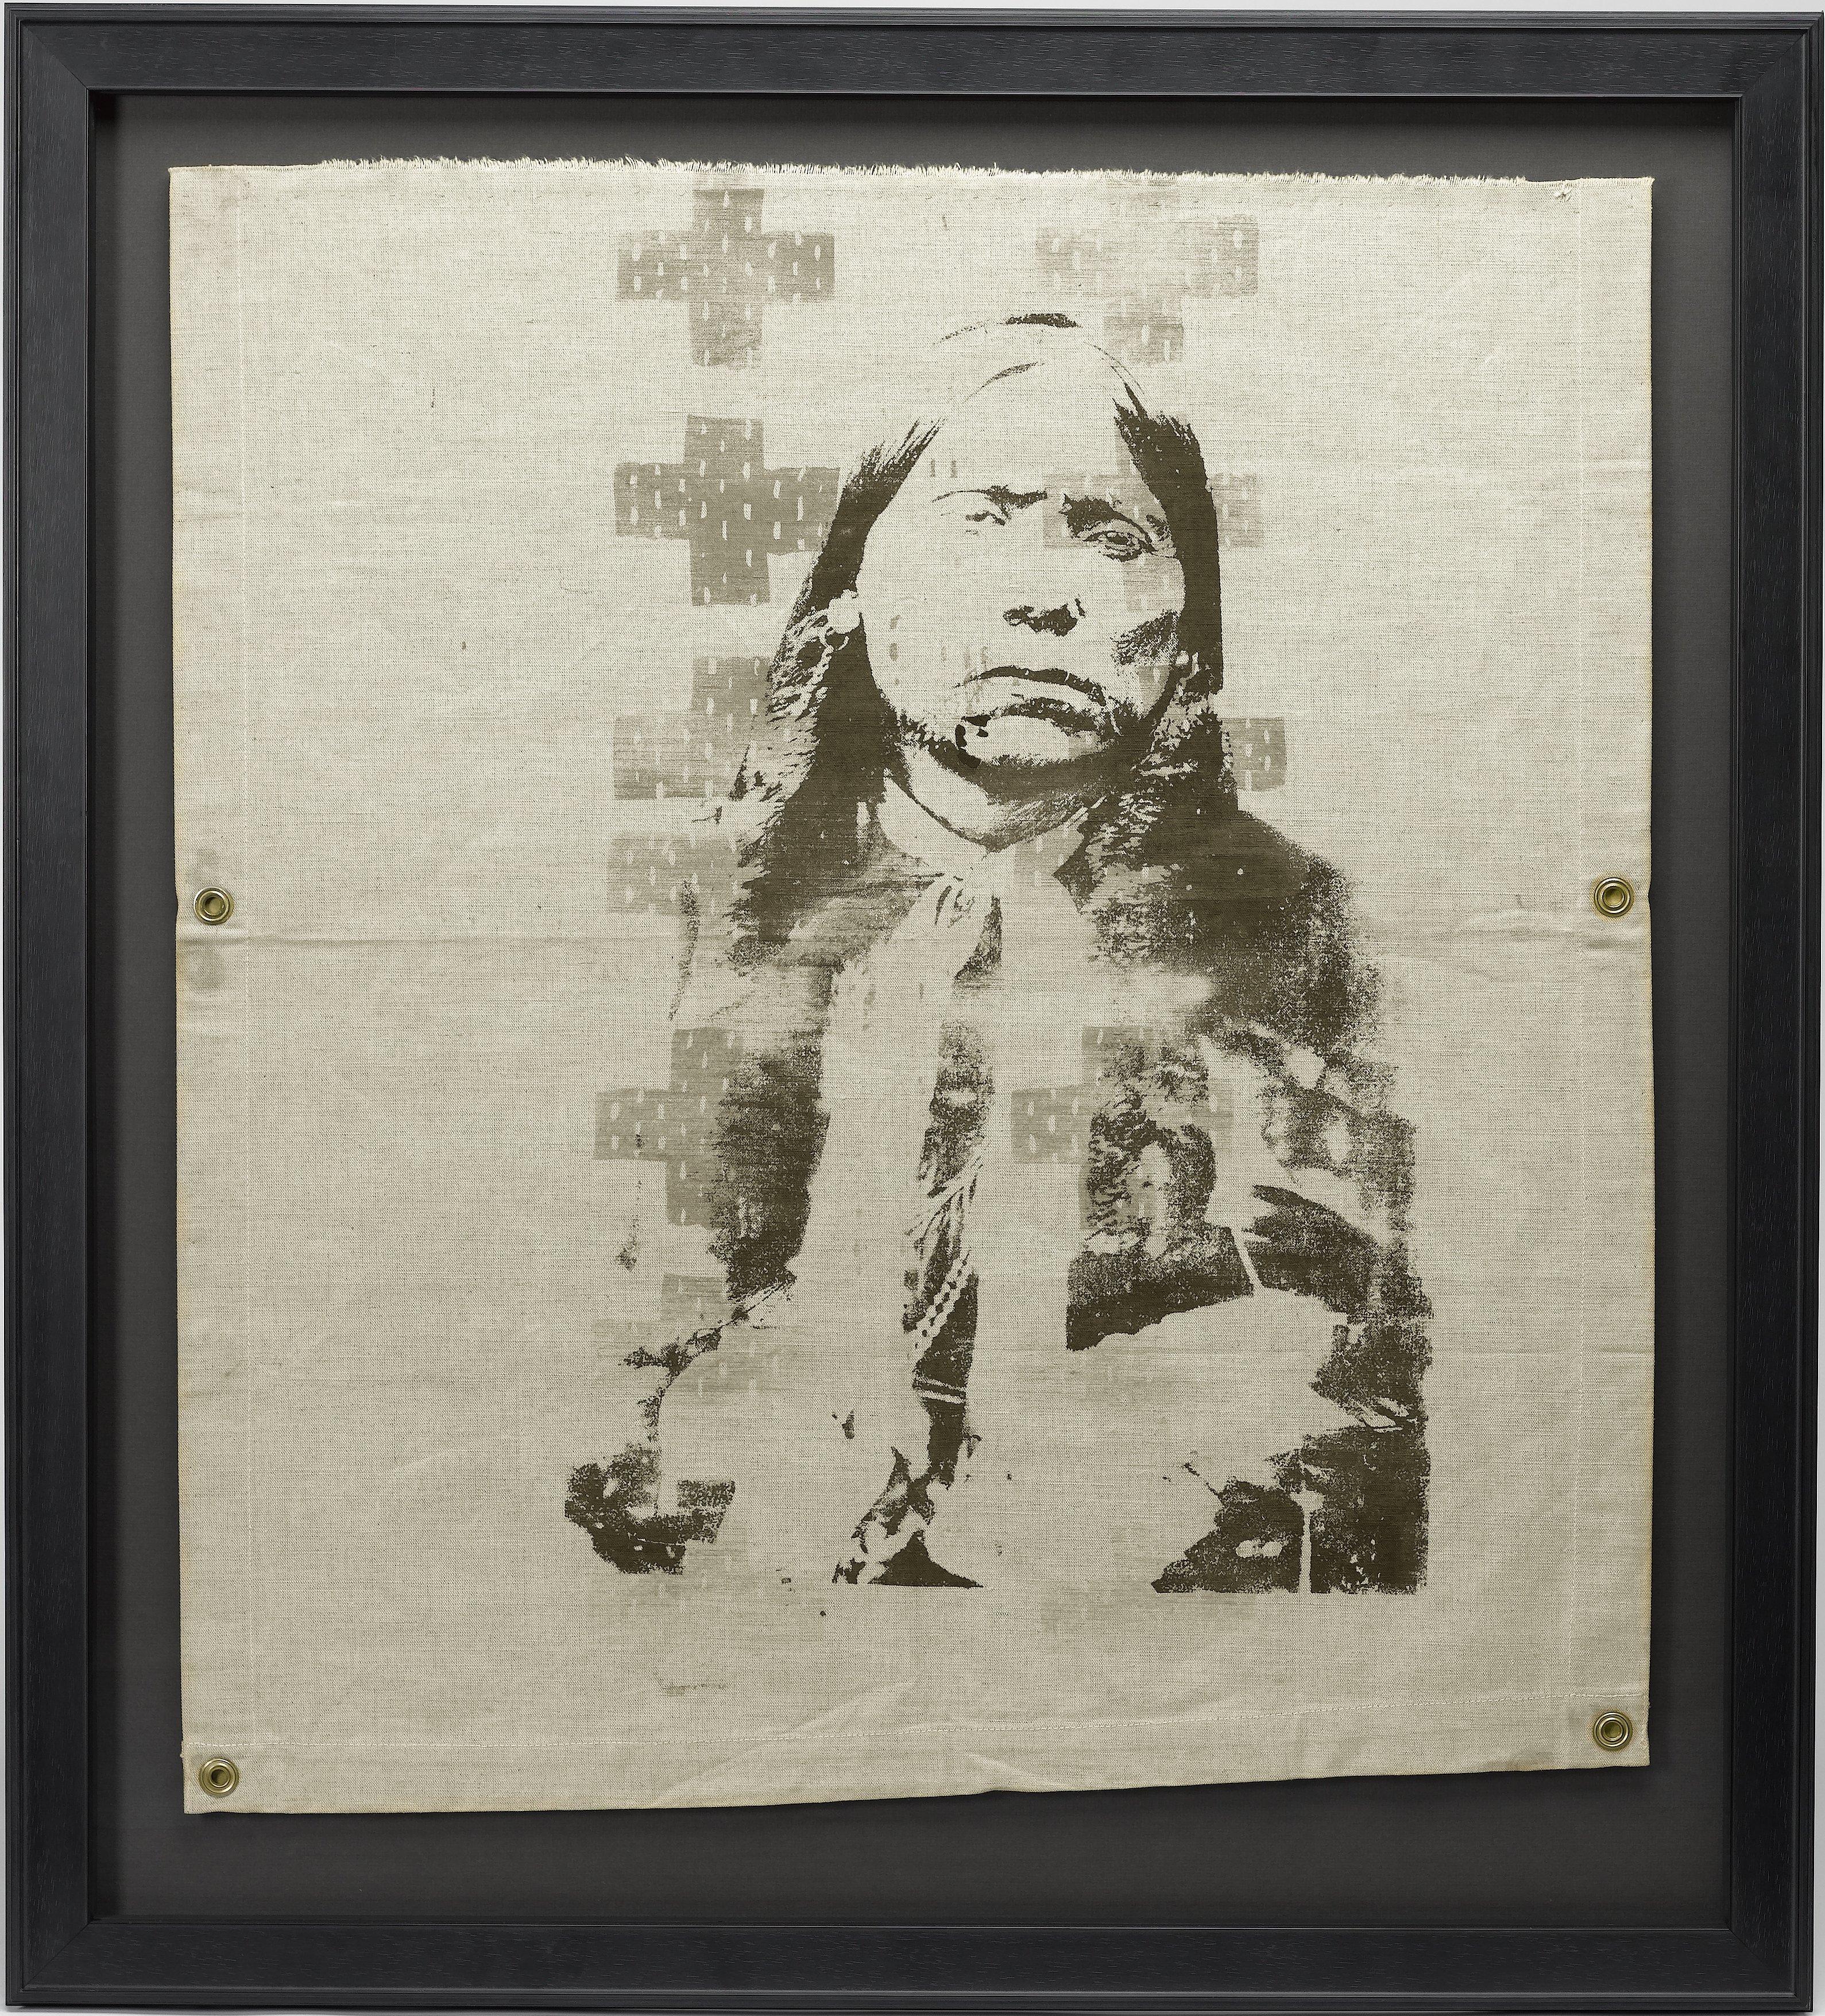 This is a contemporary silkscreen print of an American Indian entitled 